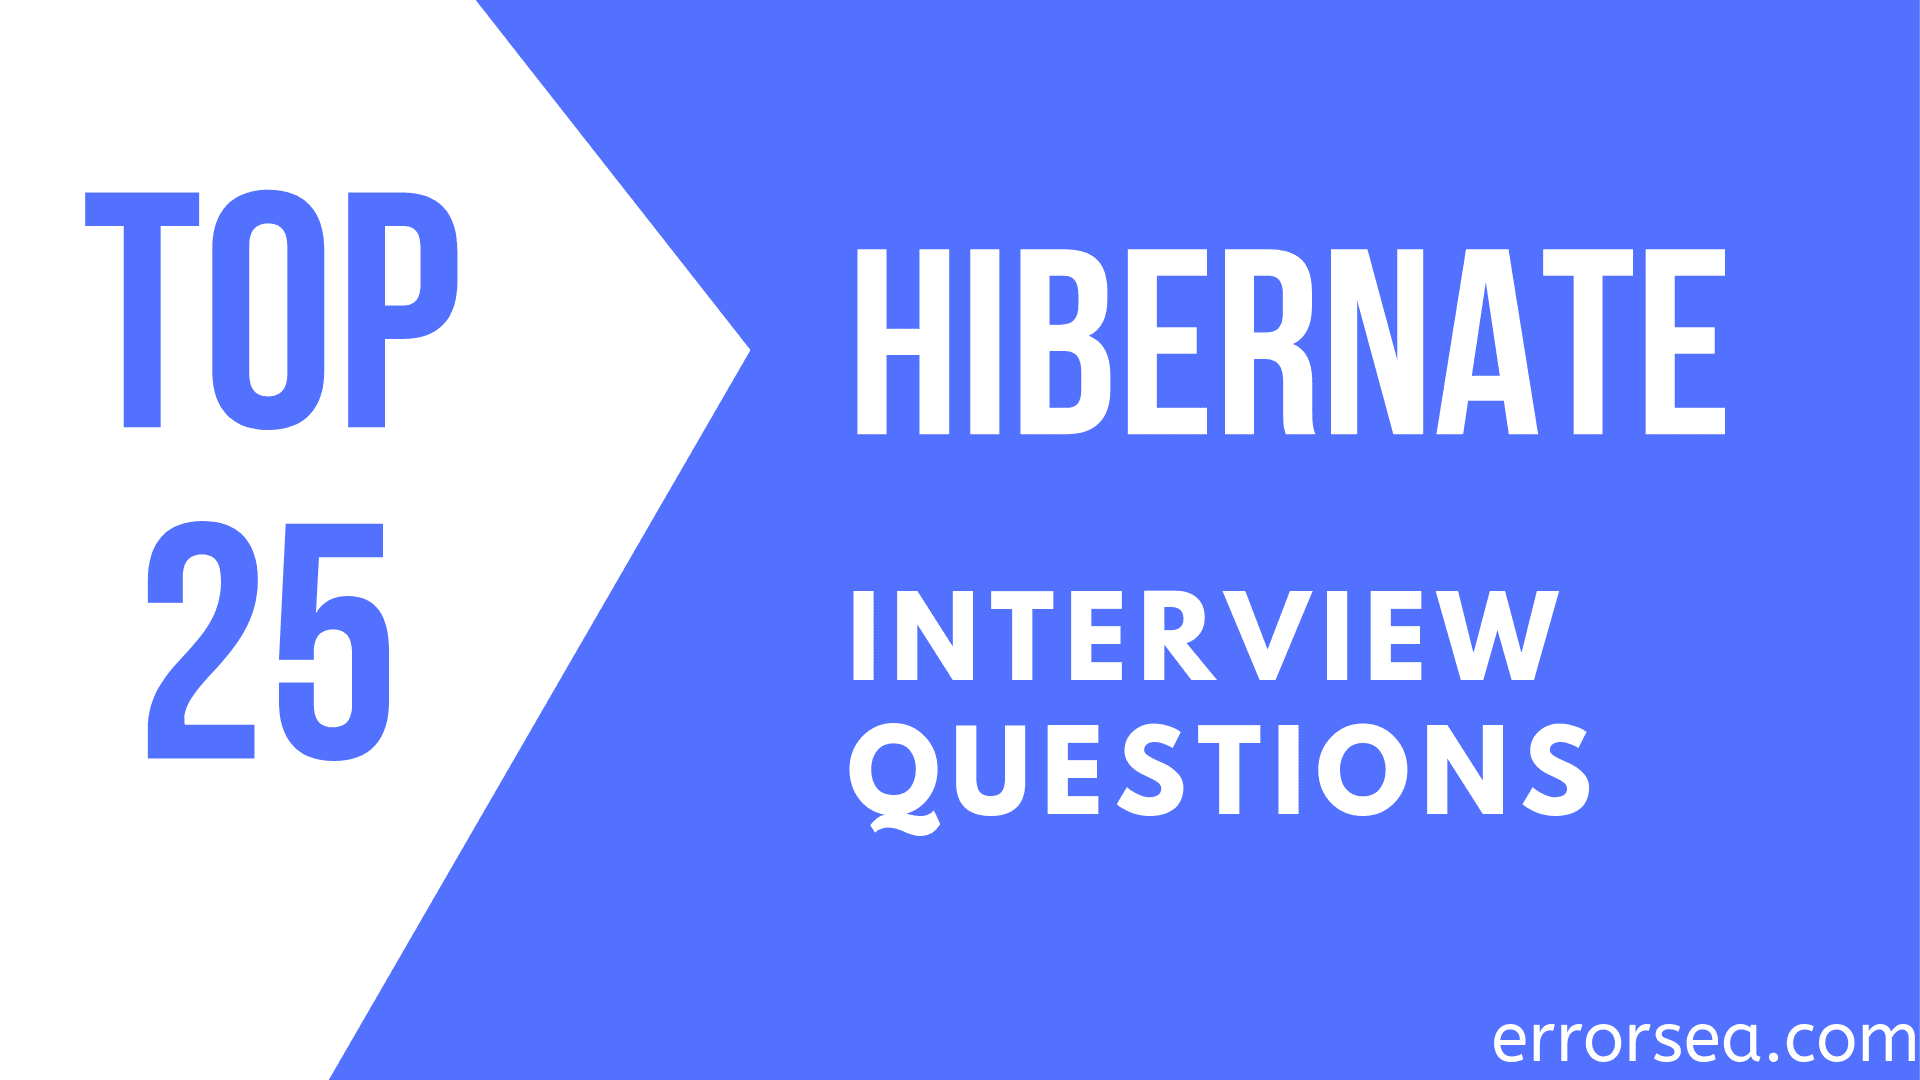 Top 25 Hibernate Tricky Interview Questions for Experienced (Free PDF Download)